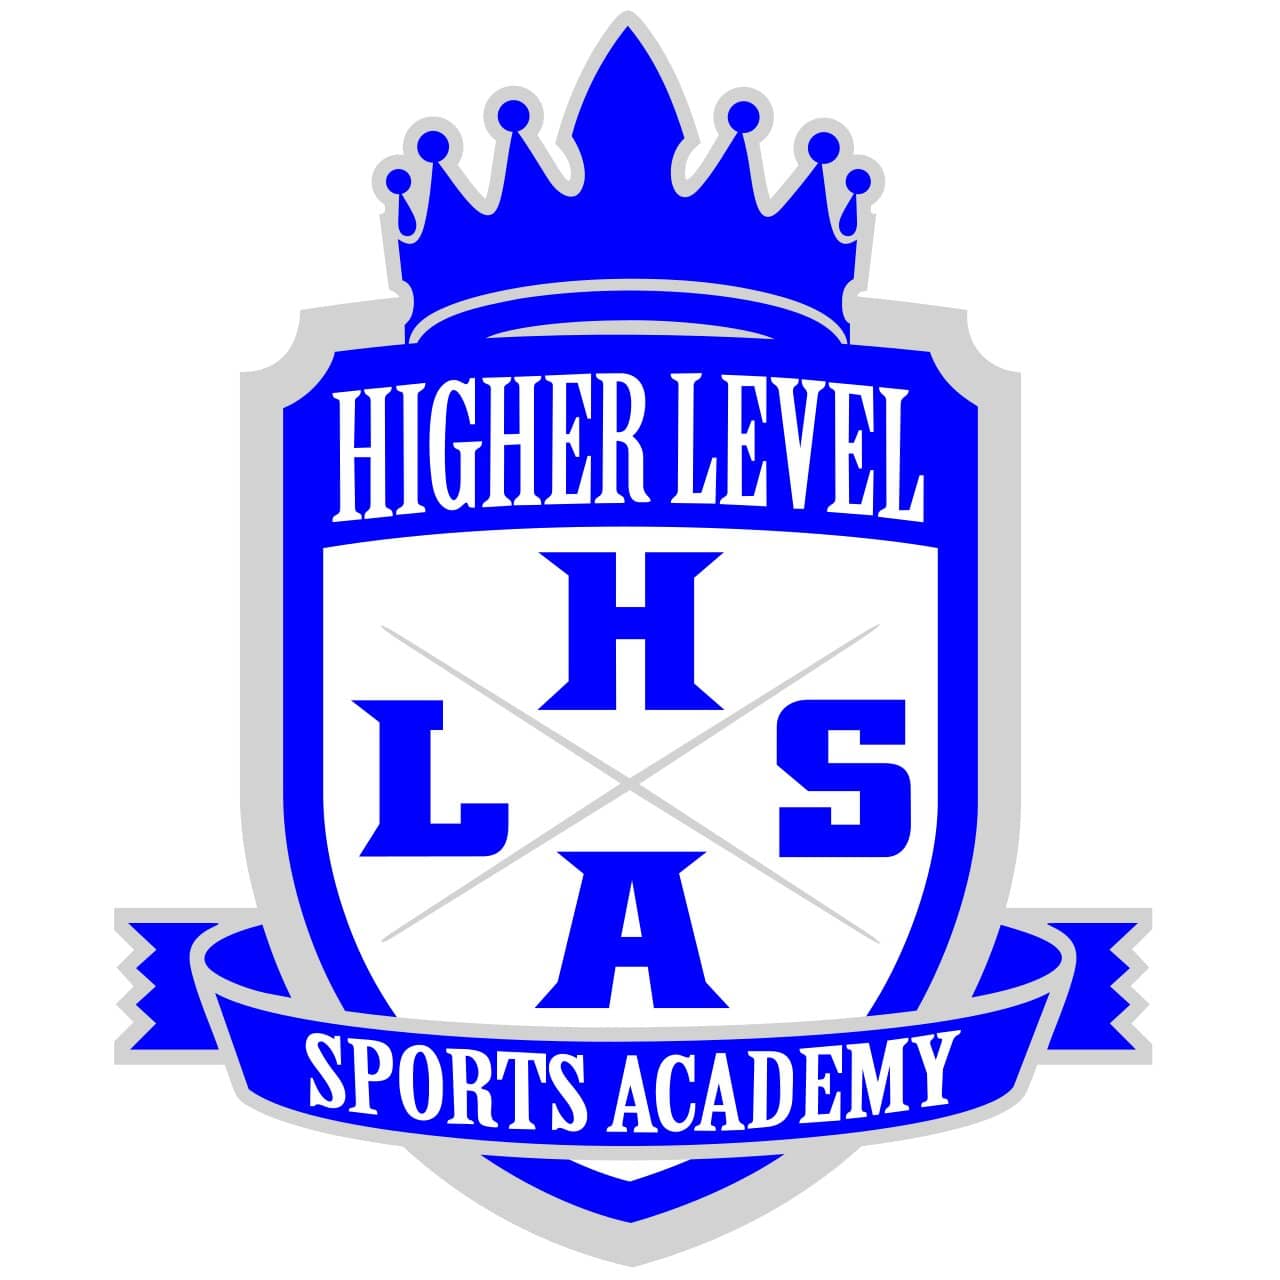 HIGHER LEVEL - COACHES